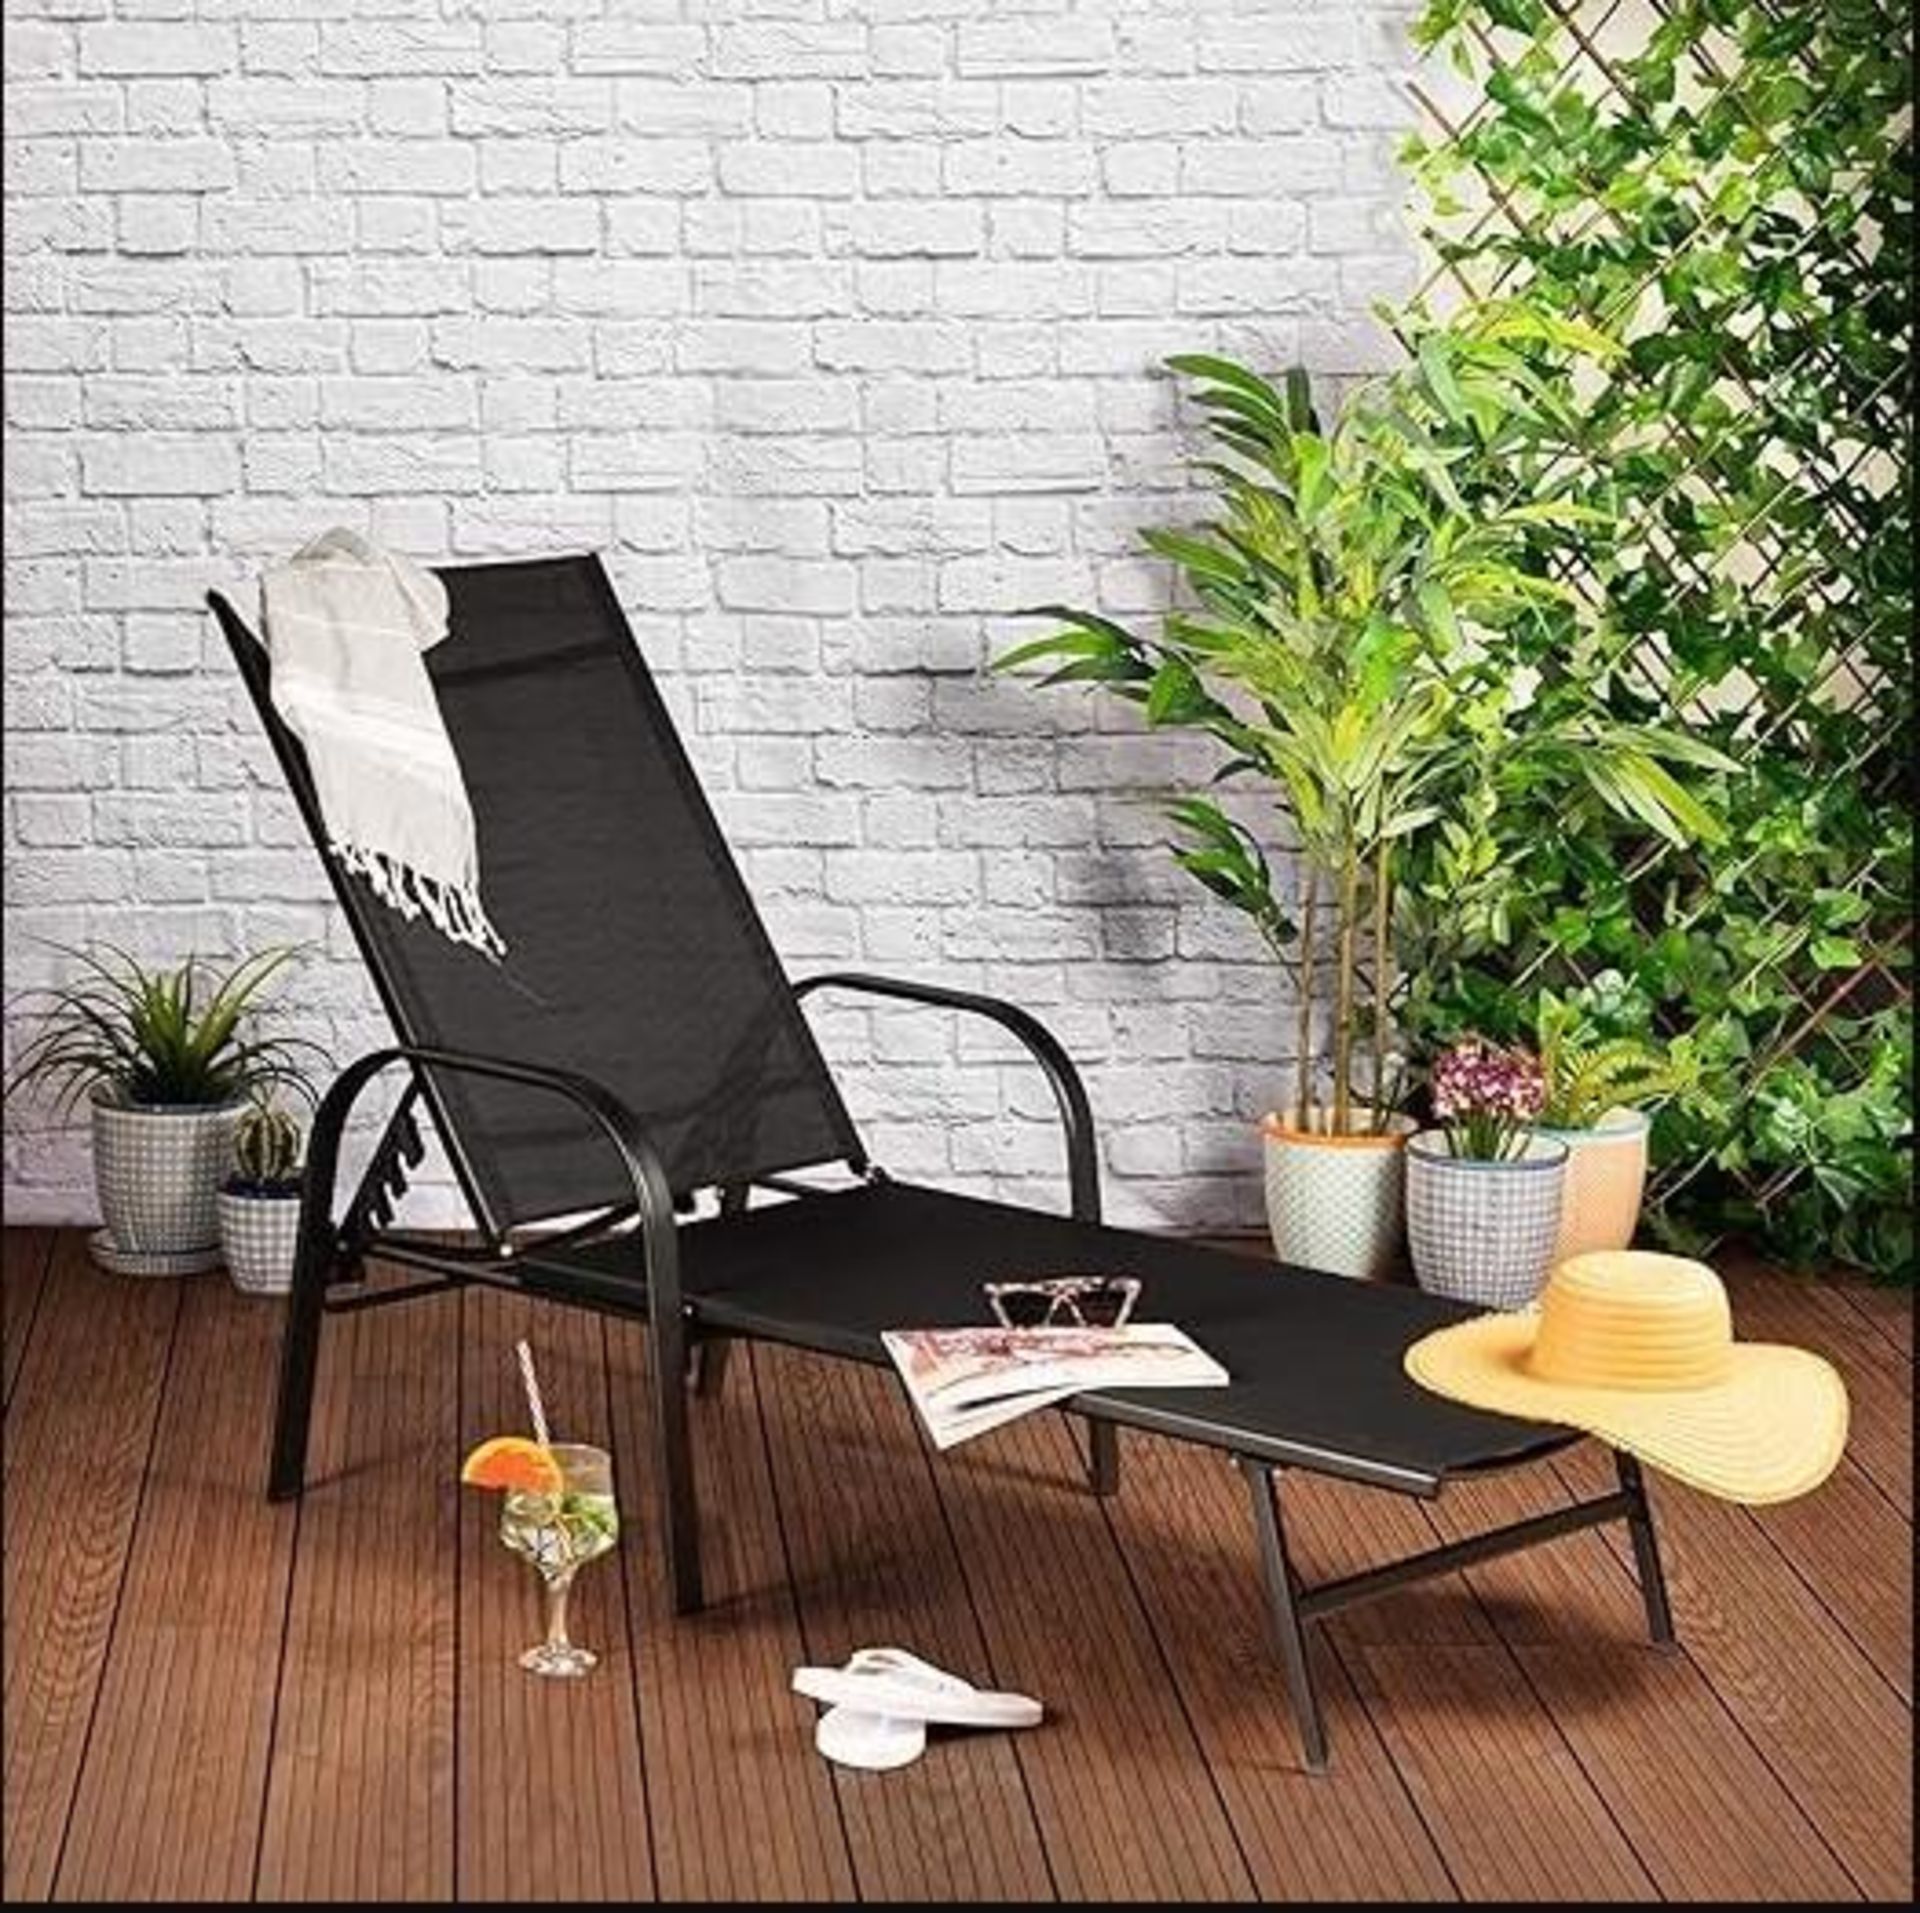 BRAND NEW & BOXED TRADE LOT - 2 X Adjustable Reclining Outdoor Patio Sun Lounger in Black - Image 2 of 7